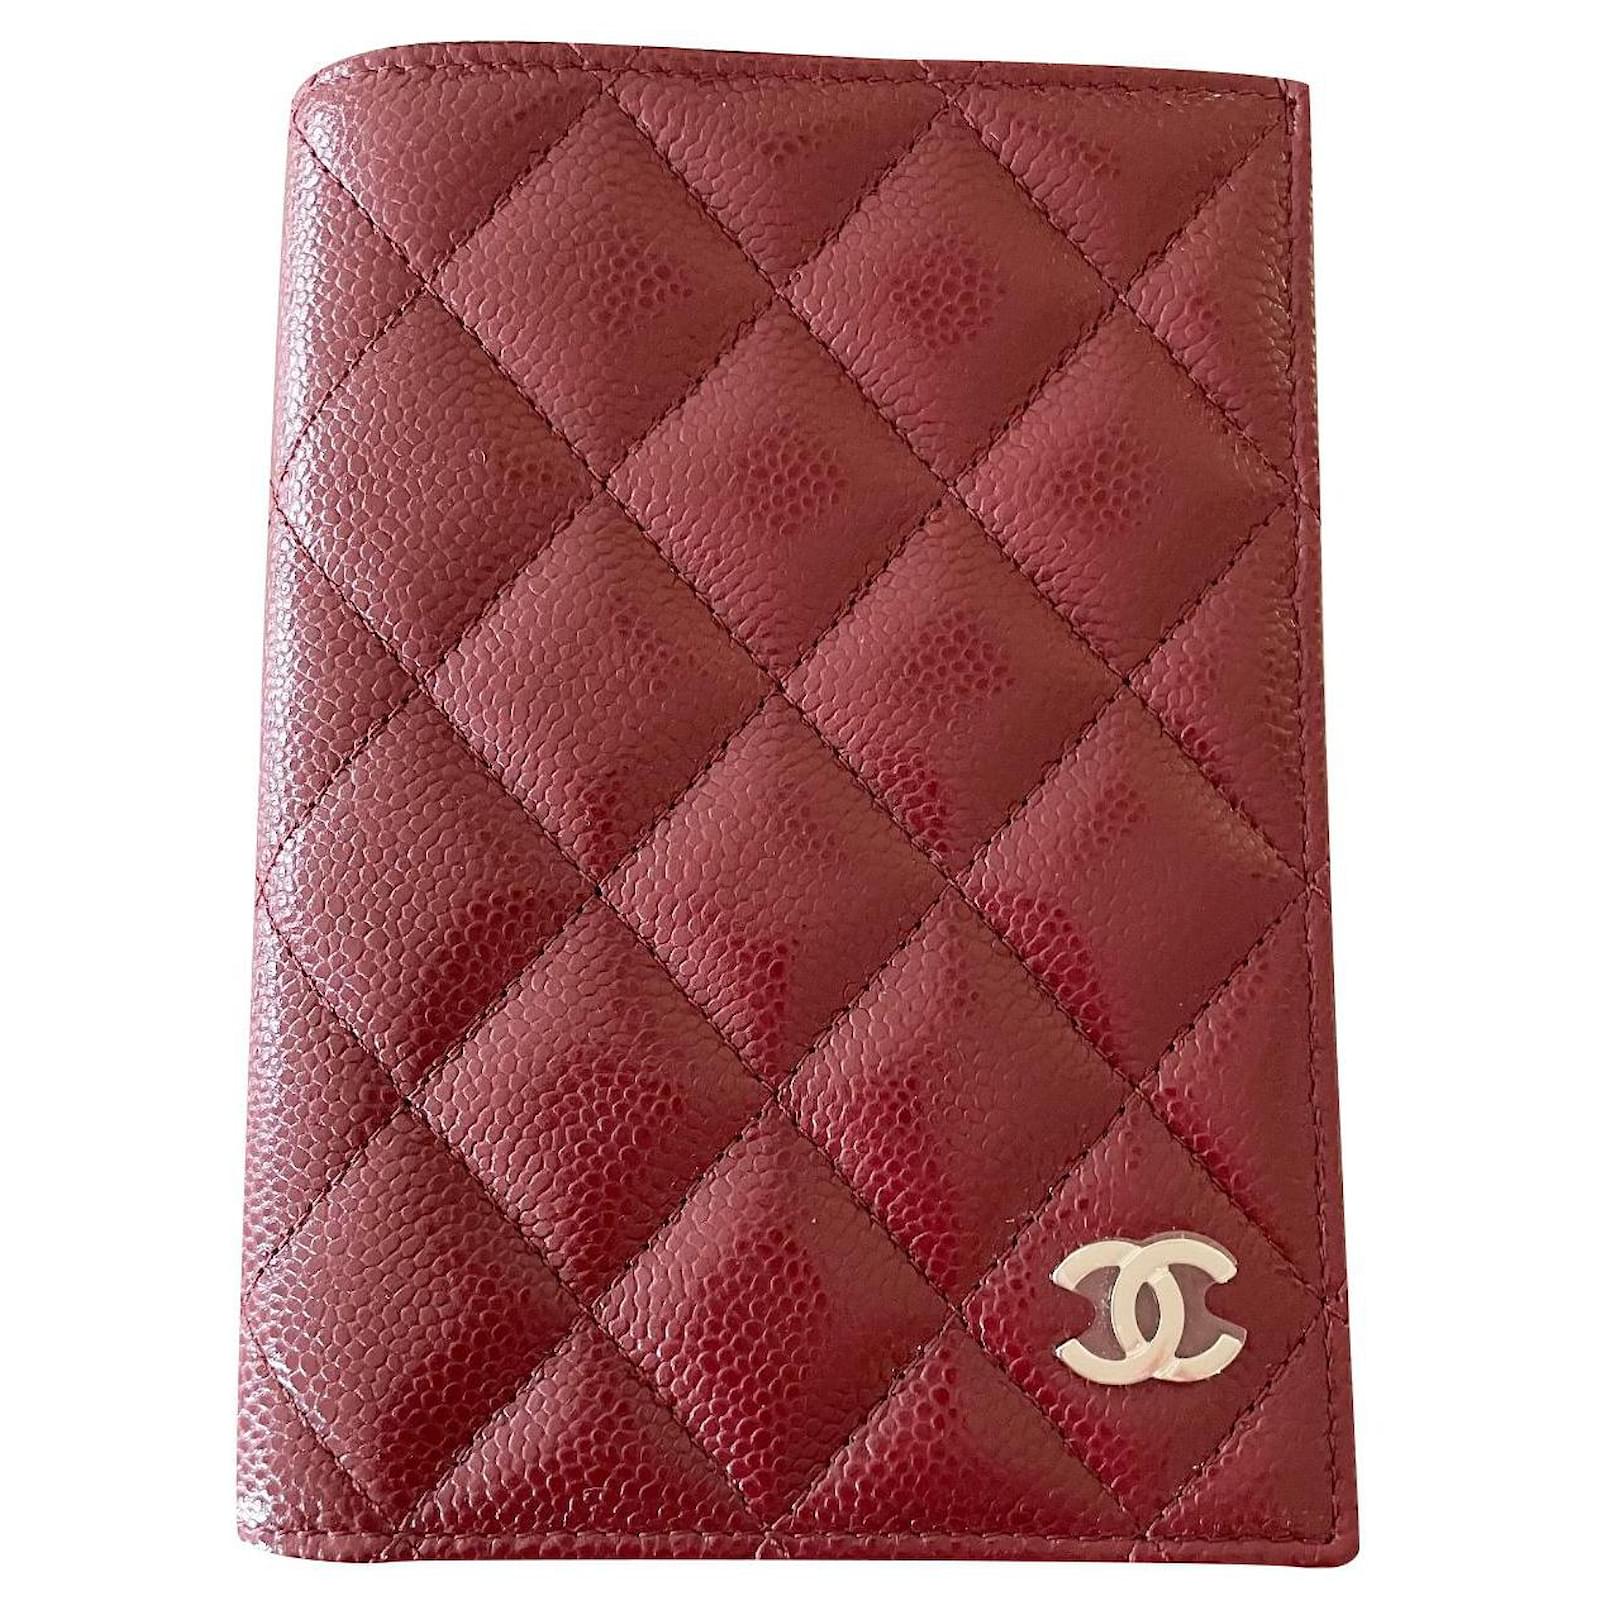 CHANEL Red Patent Leather Wallets for Women for sale